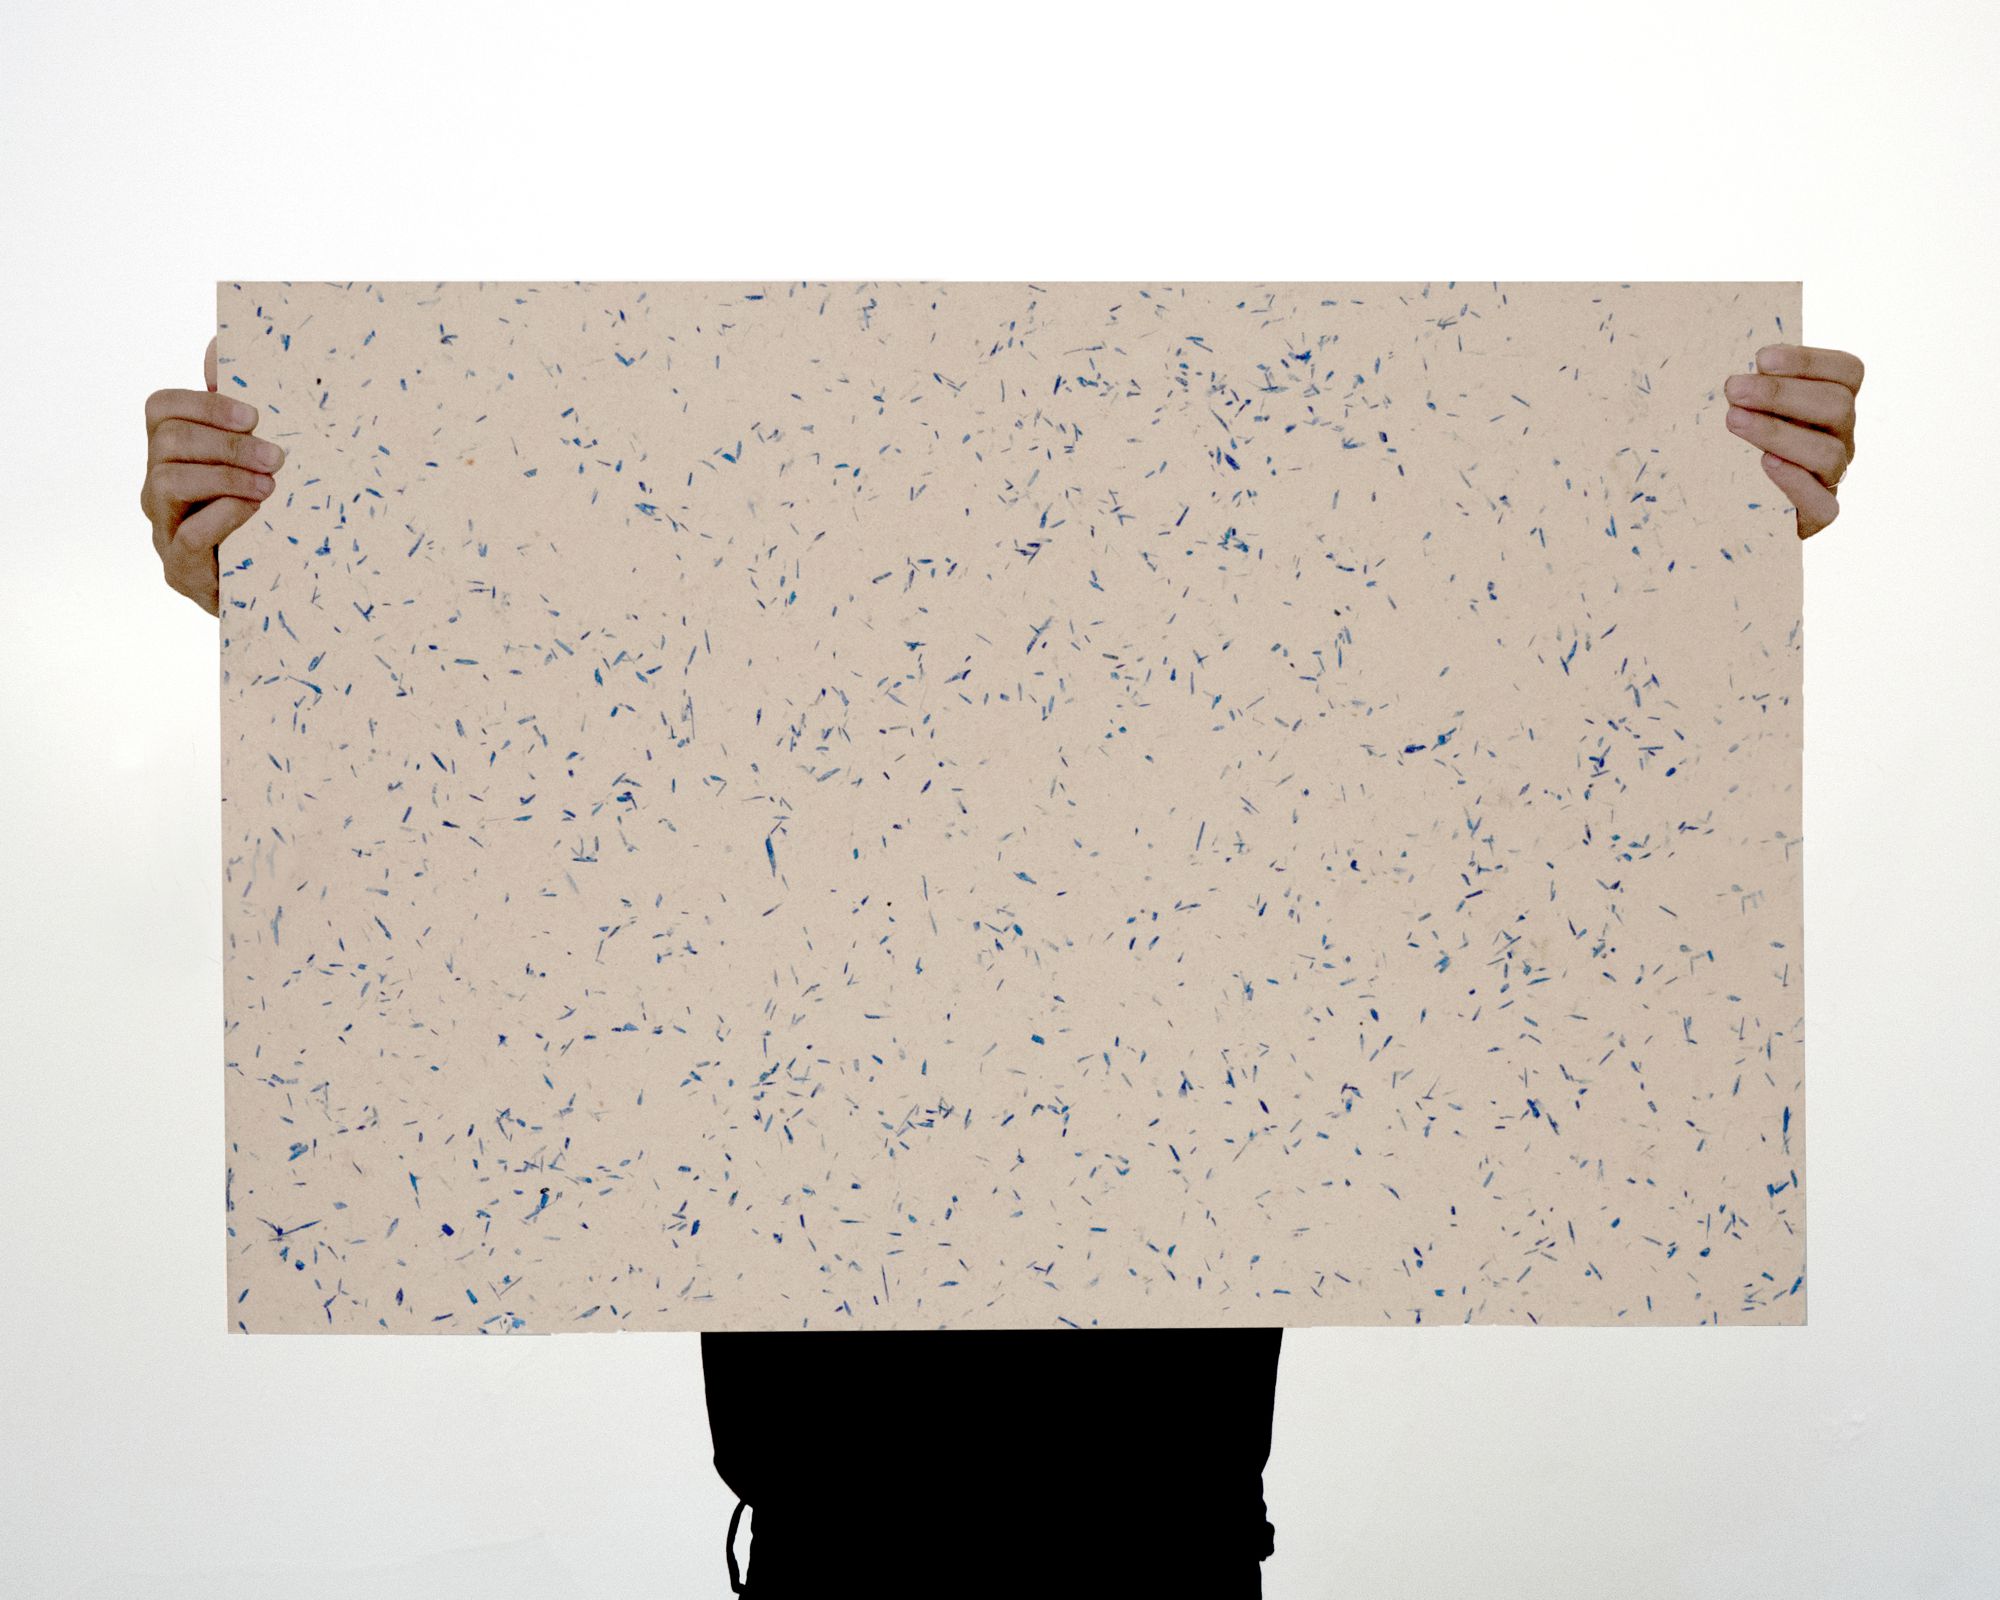 The product designer holds a rectangular sample board with both hands stretched out in front of her in such a way that only her hands and part of her torso are visible. The board is cream in color and speckled with dark blue spots (similar to terrazzo).